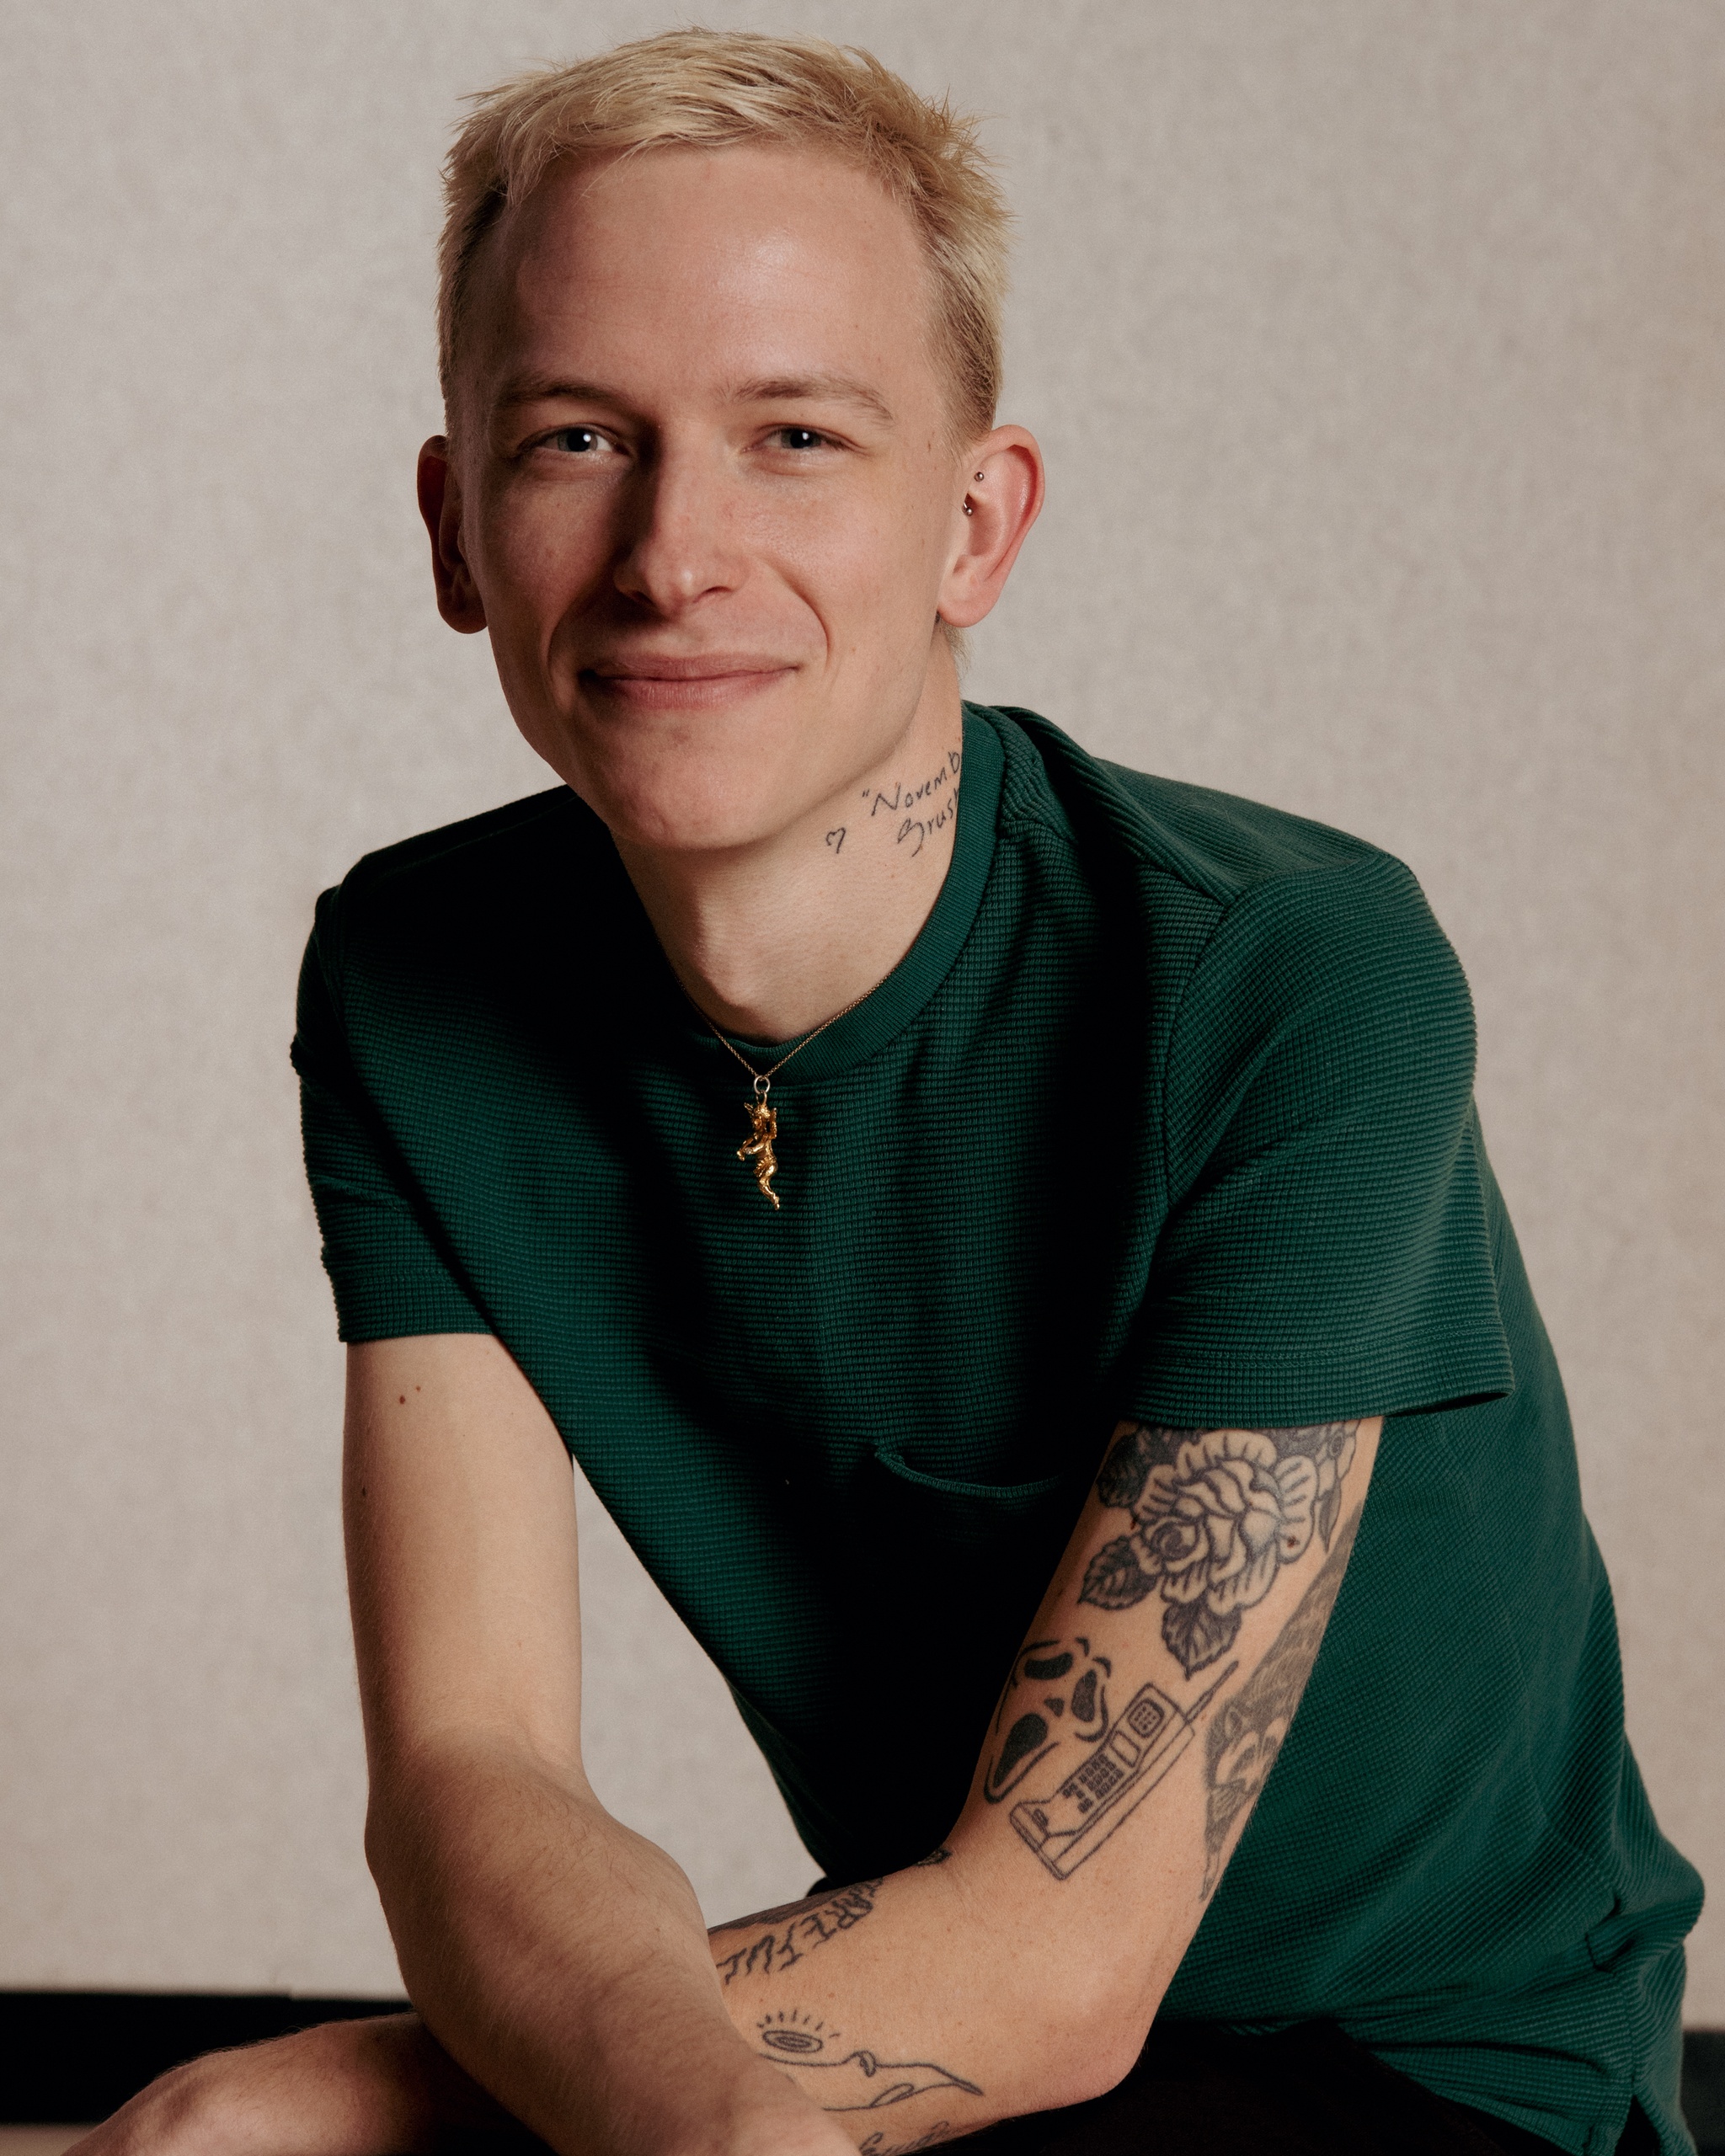 A portrait of Jake Brush, a white person posing with arms loosely crossed across his knee. He has short bleached blond hair and smiles with his eyes without opening his mouth. He wears a dark green tshirt and has tattoos down his left arm. Photo by Dana Golan